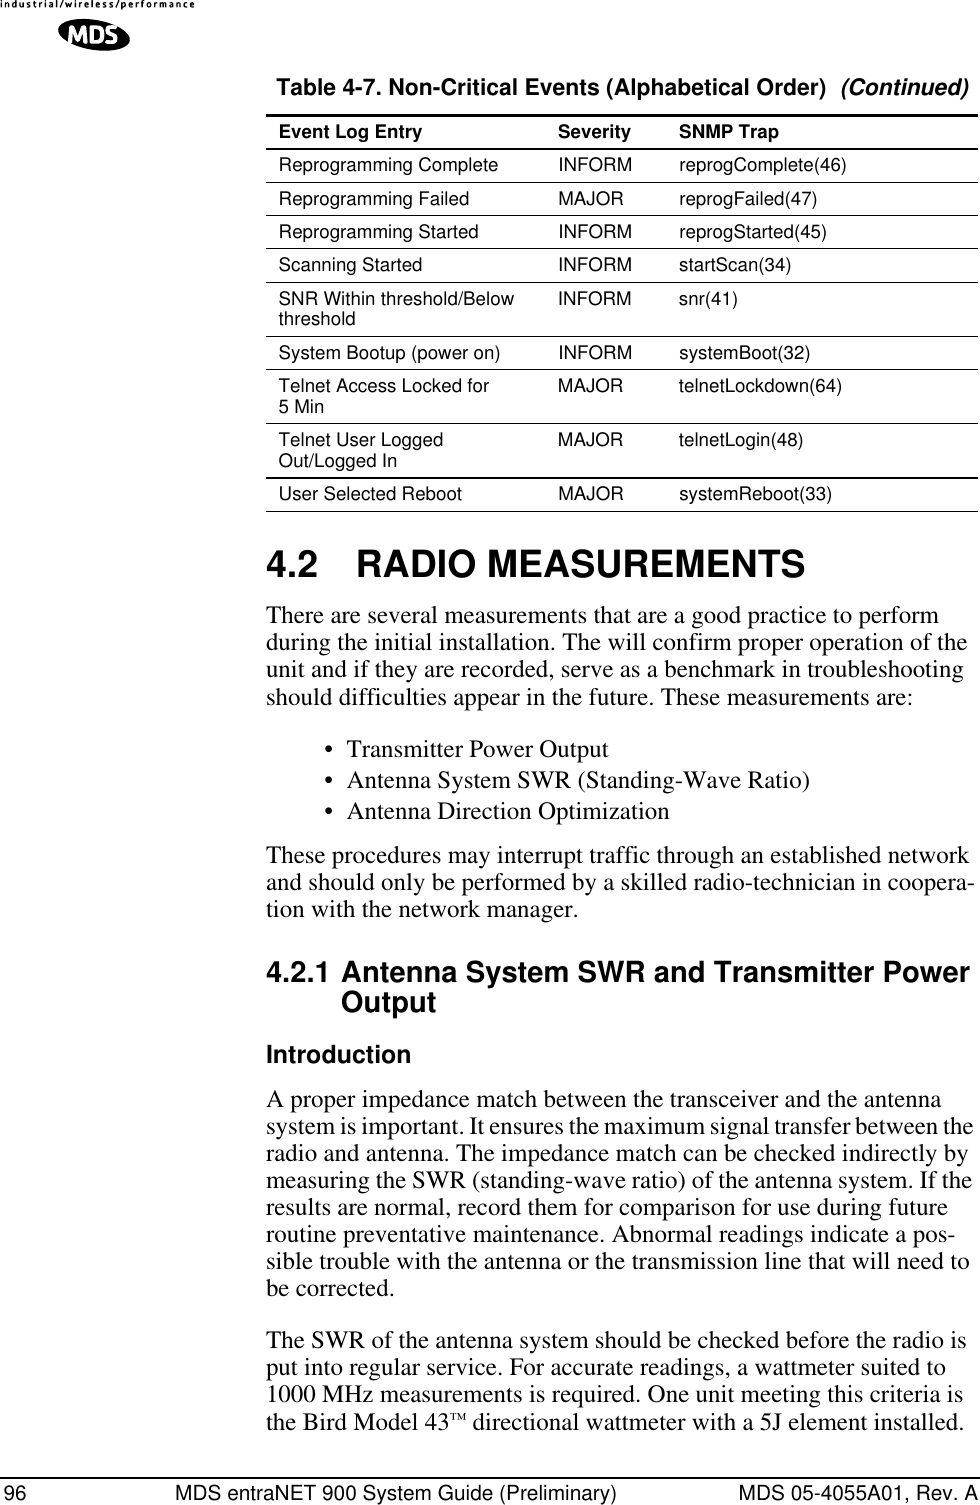 96 MDS entraNET 900 System Guide (Preliminary) MDS 05-4055A01, Rev. A4.2 RADIO MEASUREMENTSThere are several measurements that are a good practice to perform during the initial installation. The will confirm proper operation of the unit and if they are recorded, serve as a benchmark in troubleshooting should difficulties appear in the future. These measurements are:• Transmitter Power Output• Antenna System SWR (Standing-Wave Ratio)• Antenna Direction OptimizationThese procedures may interrupt traffic through an established network and should only be performed by a skilled radio-technician in coopera-tion with the network manager.4.2.1 Antenna System SWR and Transmitter Power OutputIntroductionA proper impedance match between the transceiver and the antenna system is important. It ensures the maximum signal transfer between the radio and antenna. The impedance match can be checked indirectly by measuring the SWR (standing-wave ratio) of the antenna system. If the results are normal, record them for comparison for use during future routine preventative maintenance. Abnormal readings indicate a pos-sible trouble with the antenna or the transmission line that will need to be corrected.The SWR of the antenna system should be checked before the radio is put into regular service. For accurate readings, a wattmeter suited to 1000 MHz measurements is required. One unit meeting this criteria is the Bird Model 43™ directional wattmeter with a 5J element installed.Reprogramming Complete INFORM reprogComplete(46)Reprogramming Failed MAJOR reprogFailed(47)Reprogramming Started INFORM reprogStarted(45)Scanning Started INFORM startScan(34)SNR Within threshold/Below threshold INFORM snr(41)System Bootup (power on) INFORM systemBoot(32)Telnet Access Locked for 5 Min MAJOR telnetLockdown(64)Telnet User Logged Out/Logged In MAJOR telnetLogin(48)User Selected Reboot MAJOR systemReboot(33)Table 4-7. Non-Critical Events (Alphabetical Order)  (Continued)Event Log Entry Severity SNMP Trap